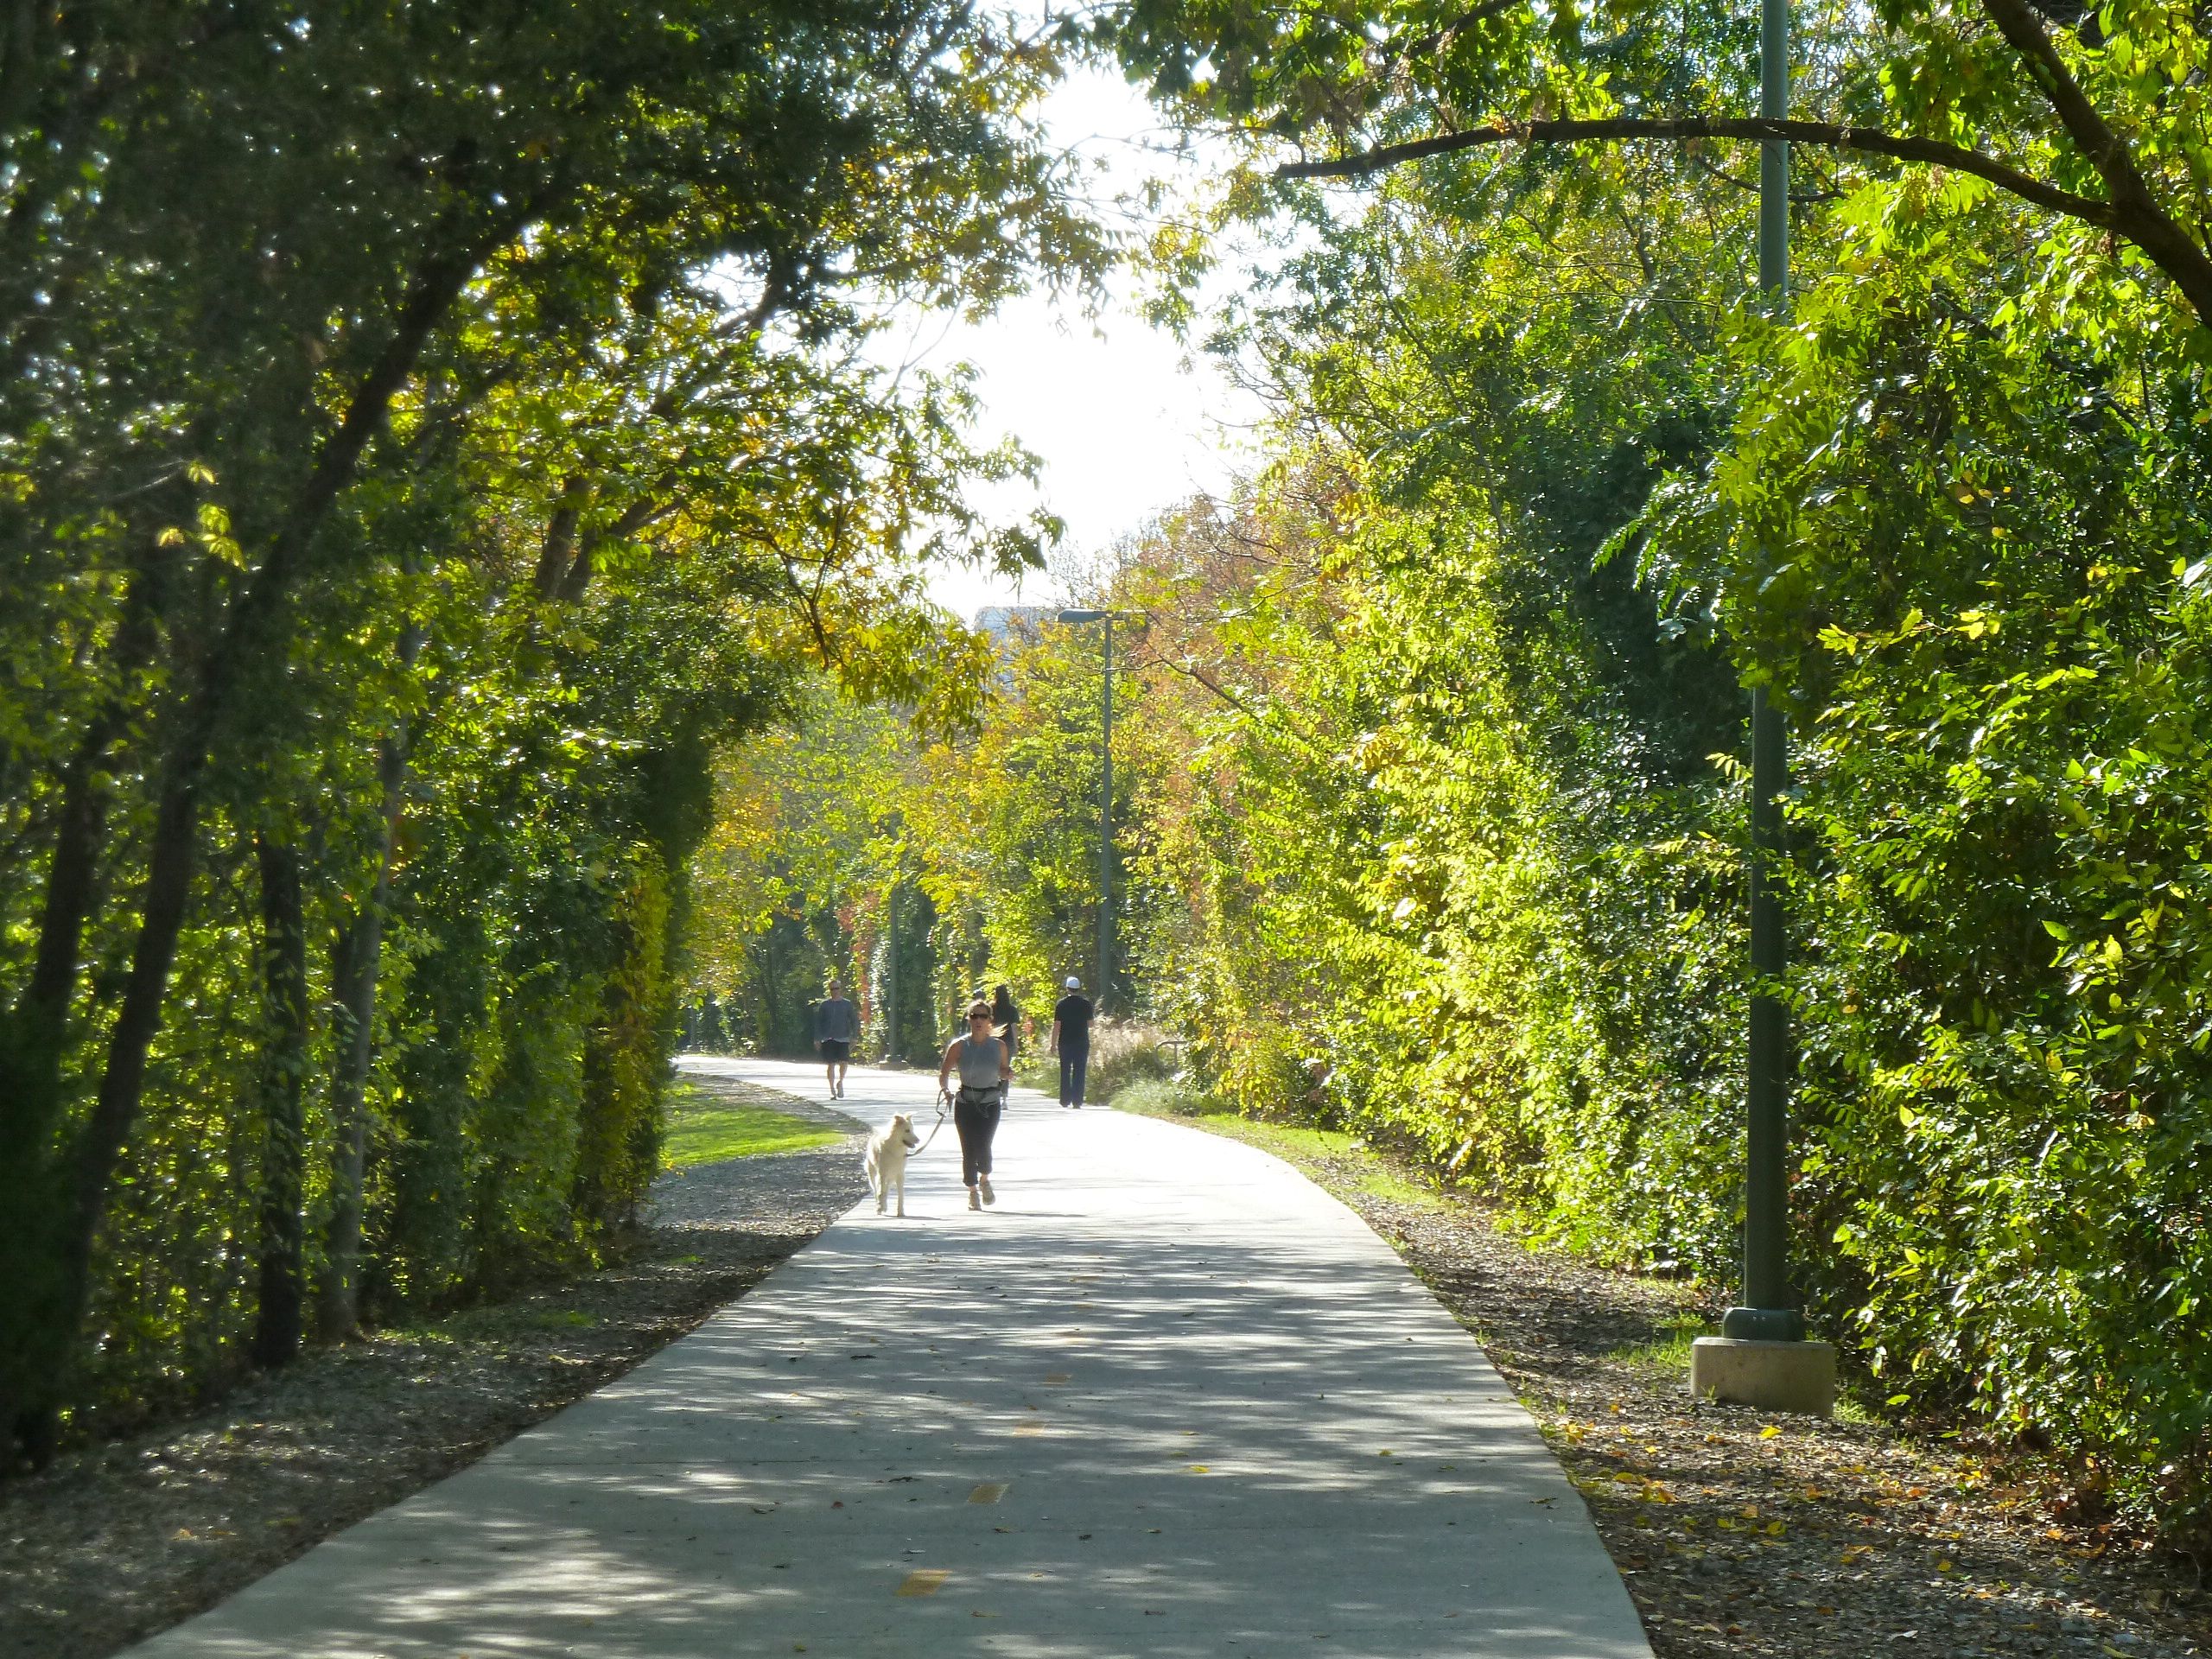 Katy Trail Wins Urban Land Institute Award for 'Best Public Place' | Candy's Dirt